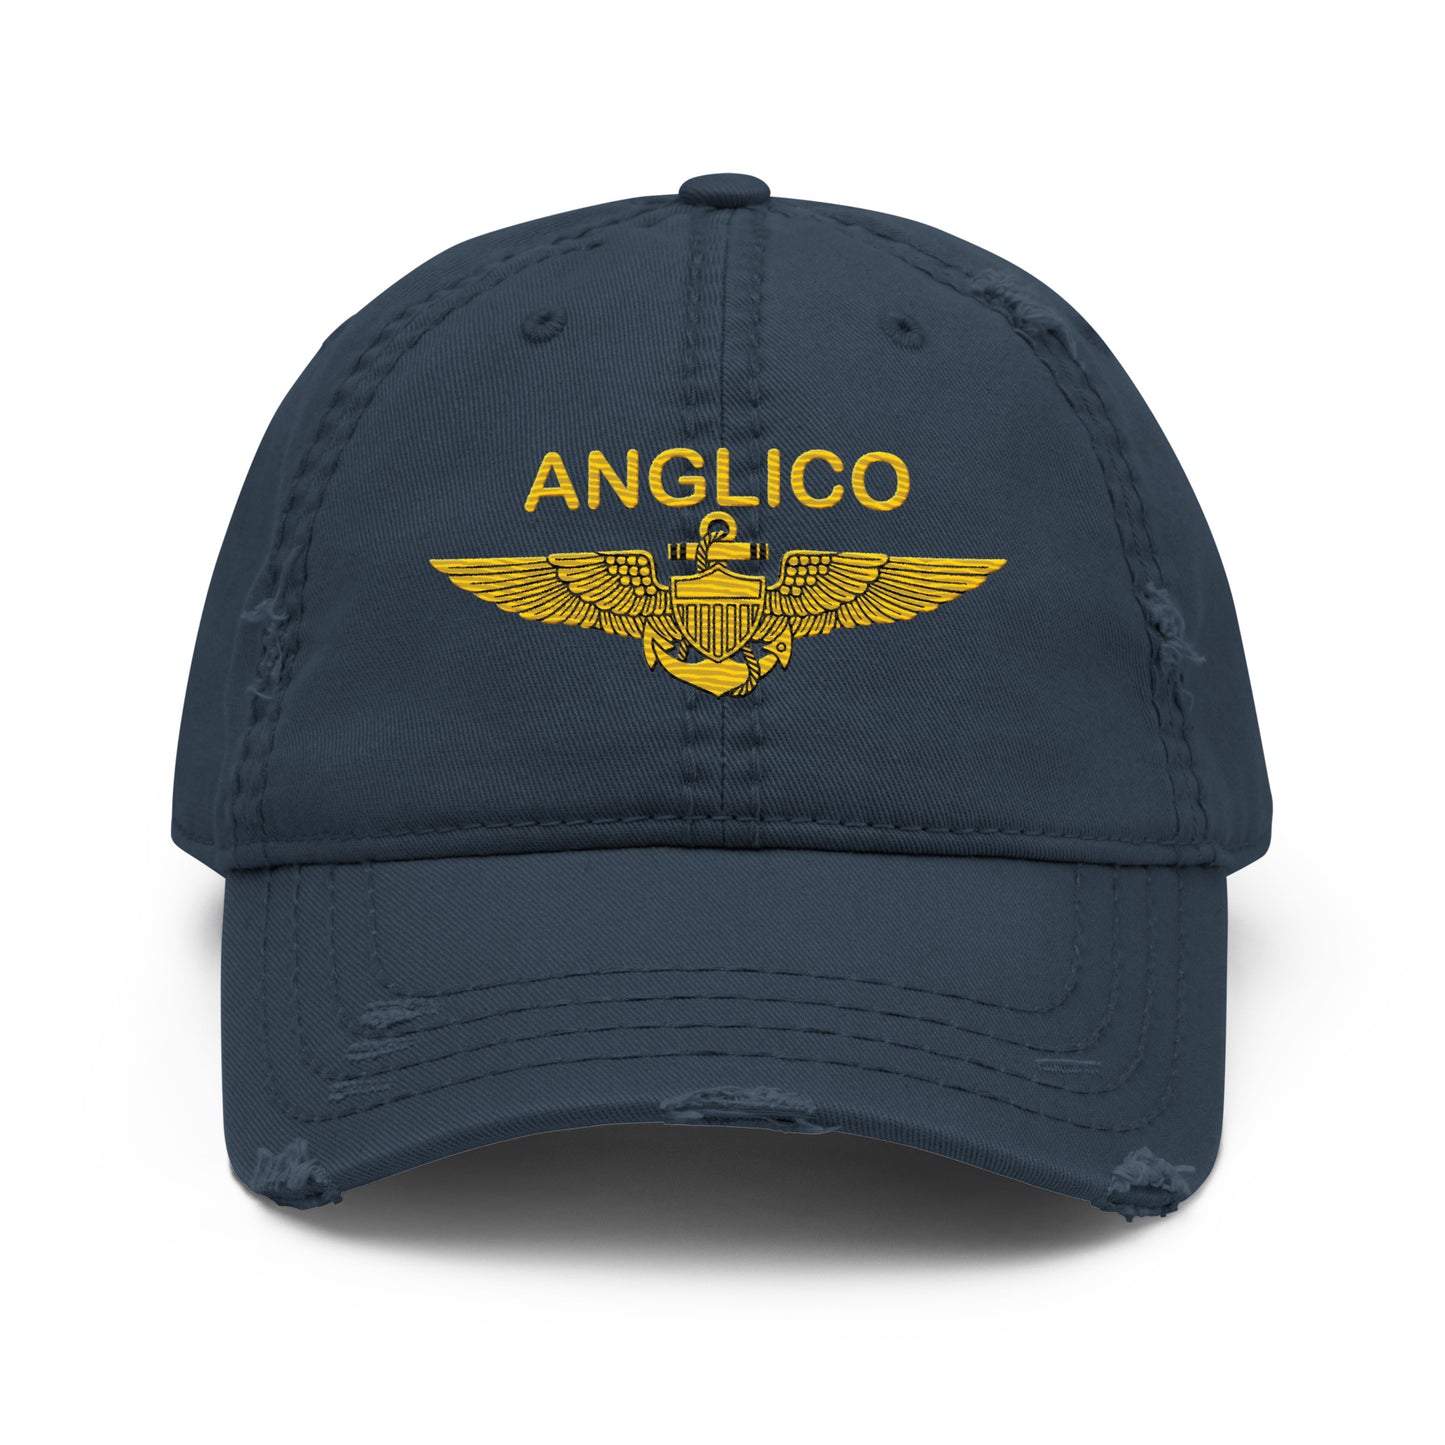 ANGLICO Naval Aviator Distressed Hat